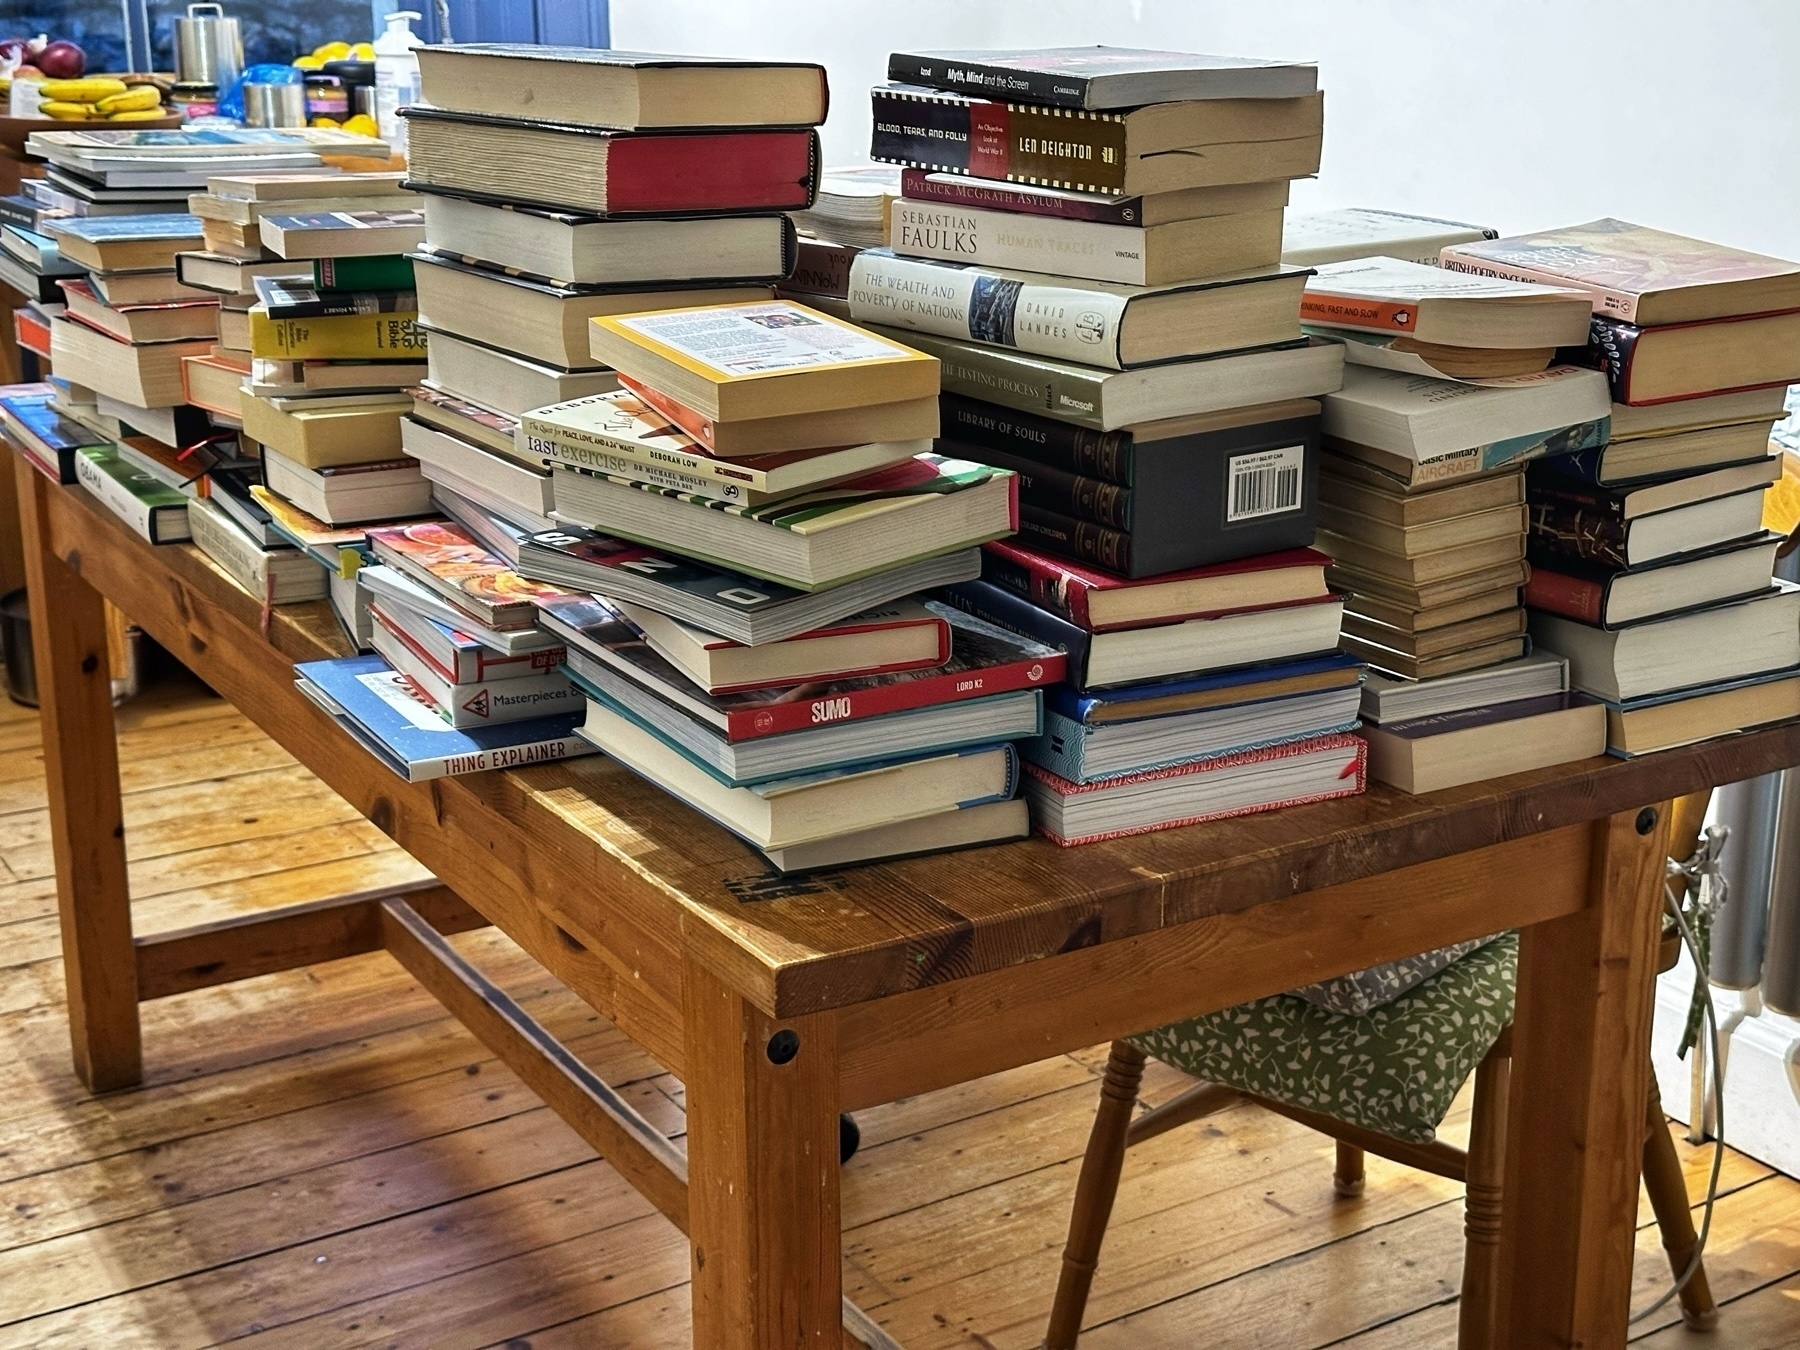 A large assortment of books stacked in multiple piles on a wooden table, with a wooden floor in the background.